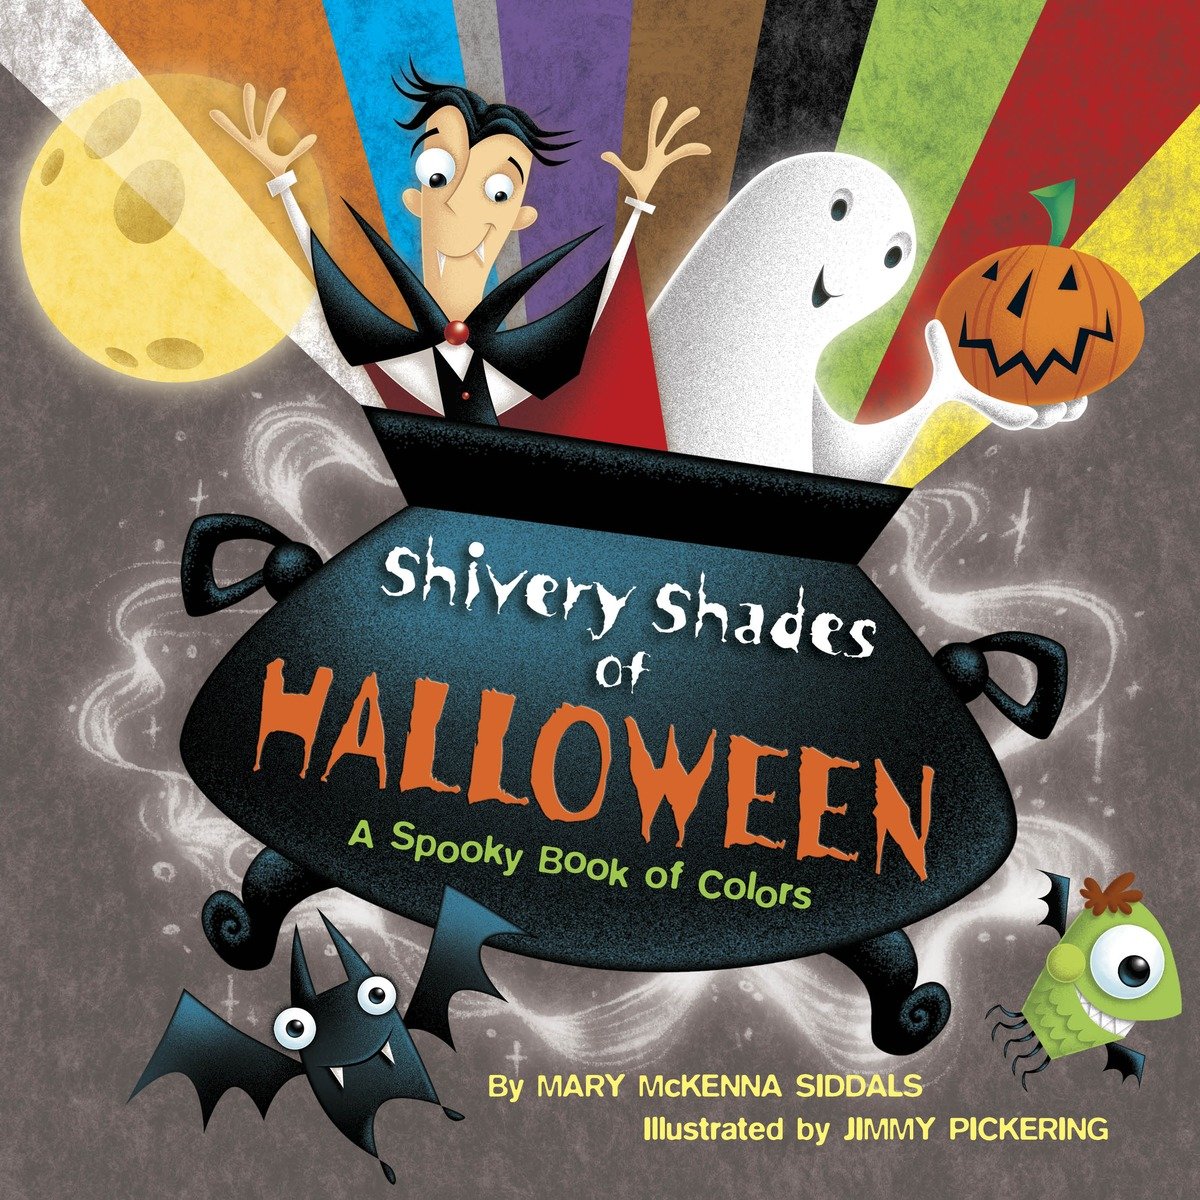 Shivery shades of Halloween cover image